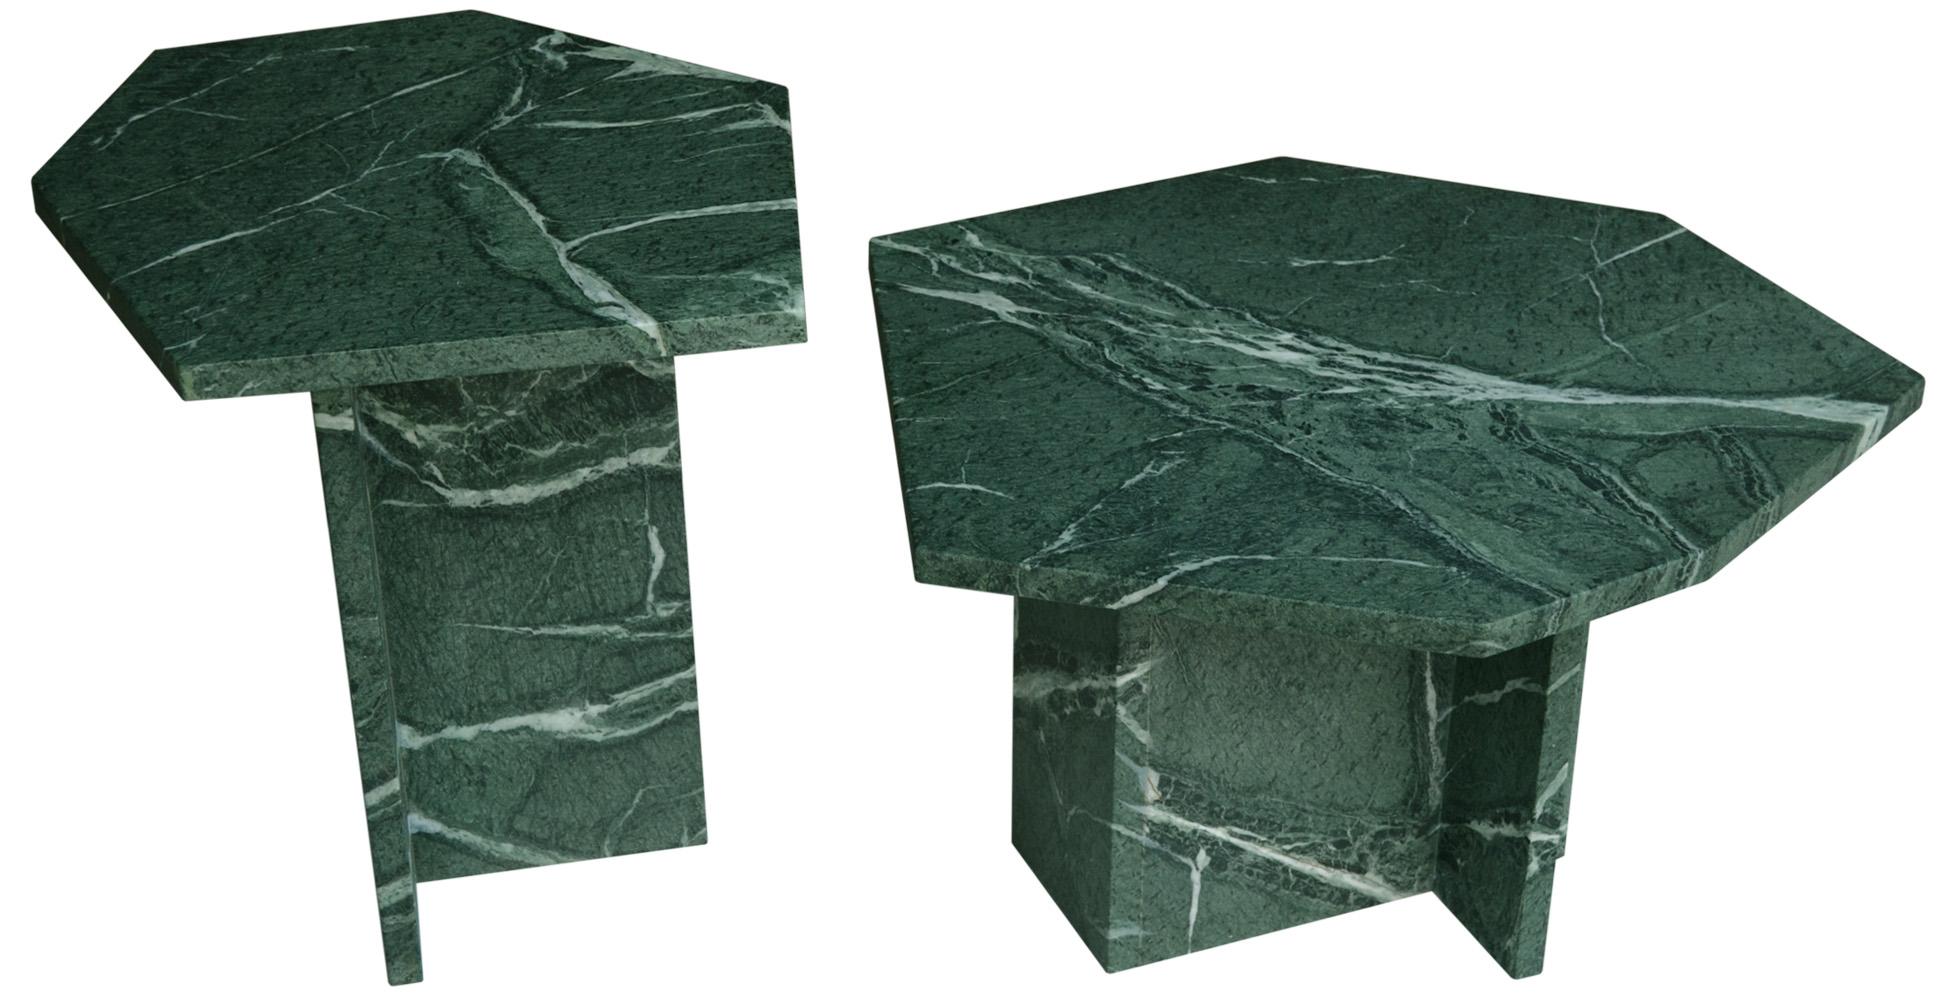 Hand-Crafted Modern Green Marble Nesting Tables  Handmade in Italy by Cupioli 